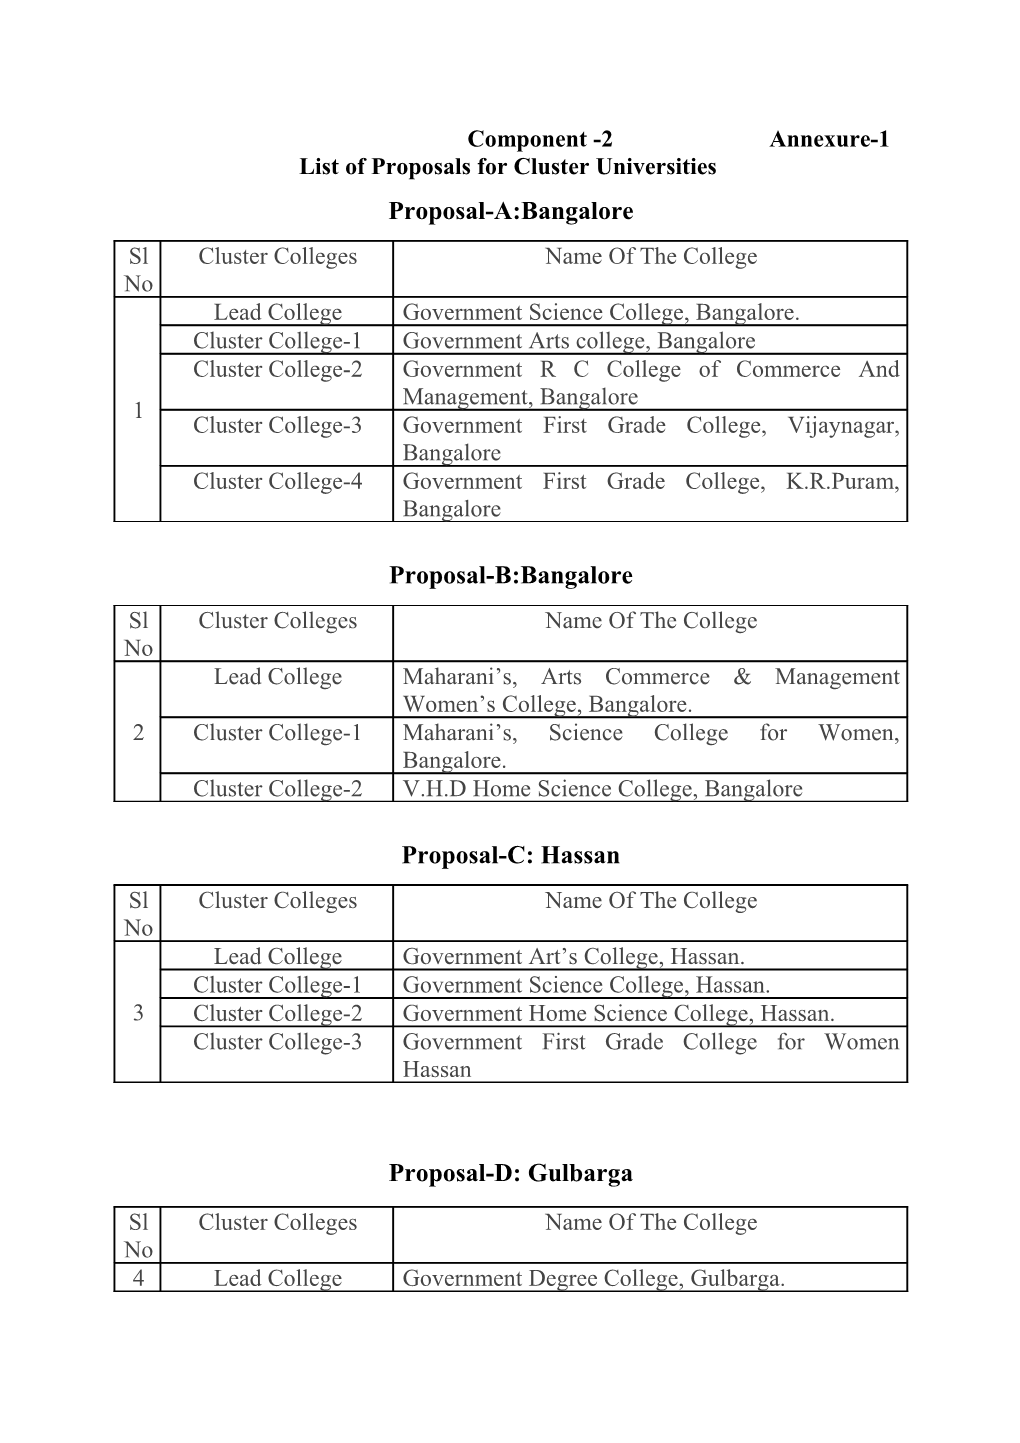 List of Proposals for Cluster Universities